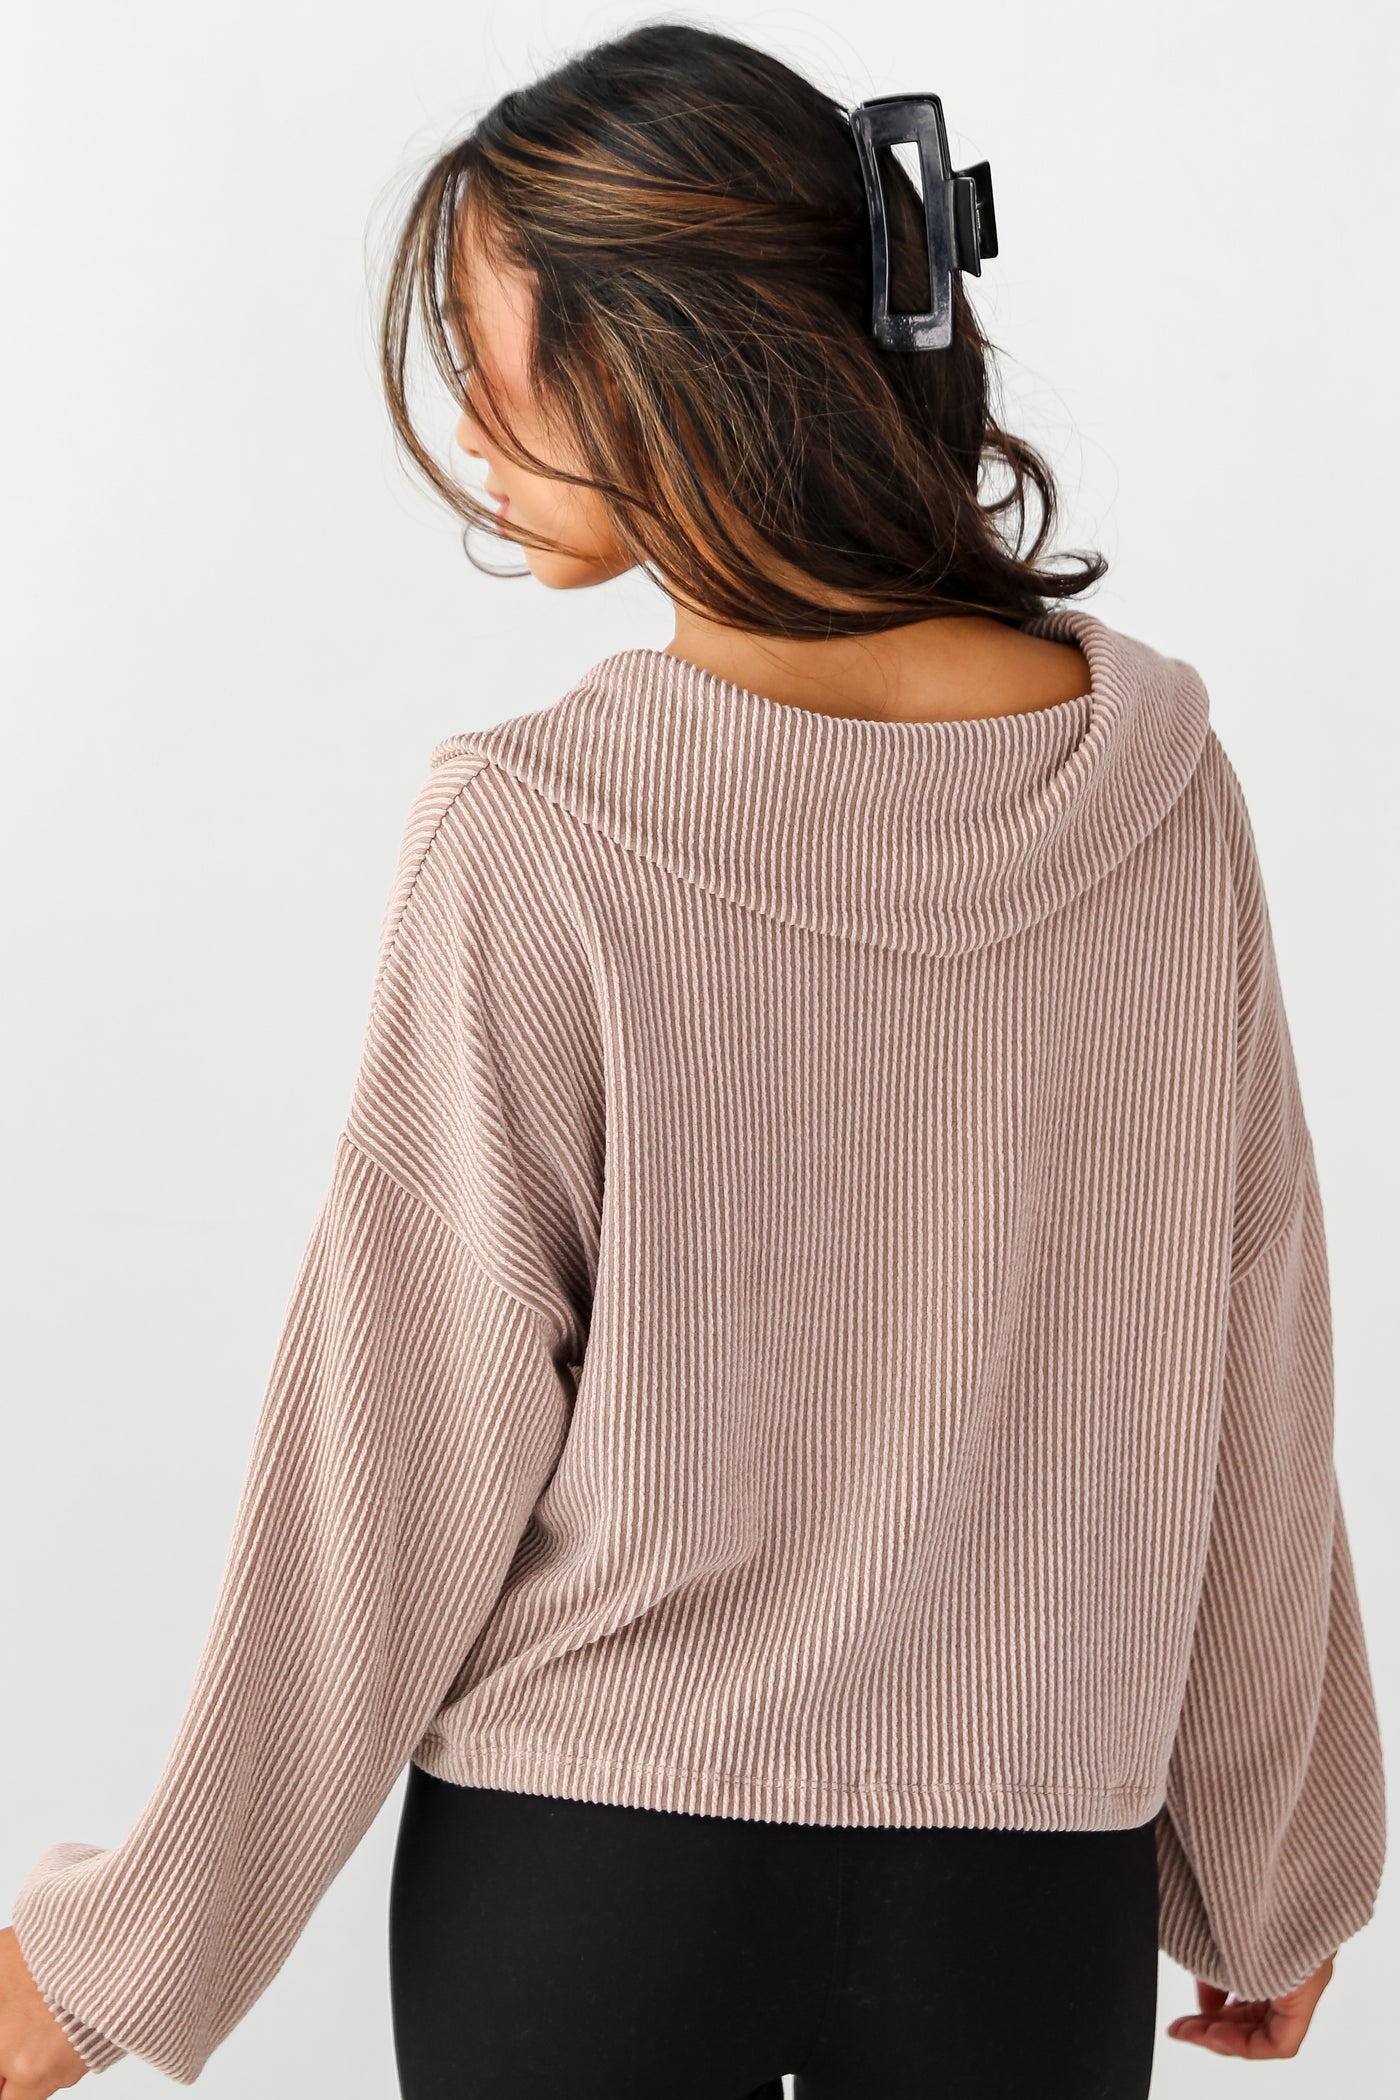 taupe Collared Corded Top back view